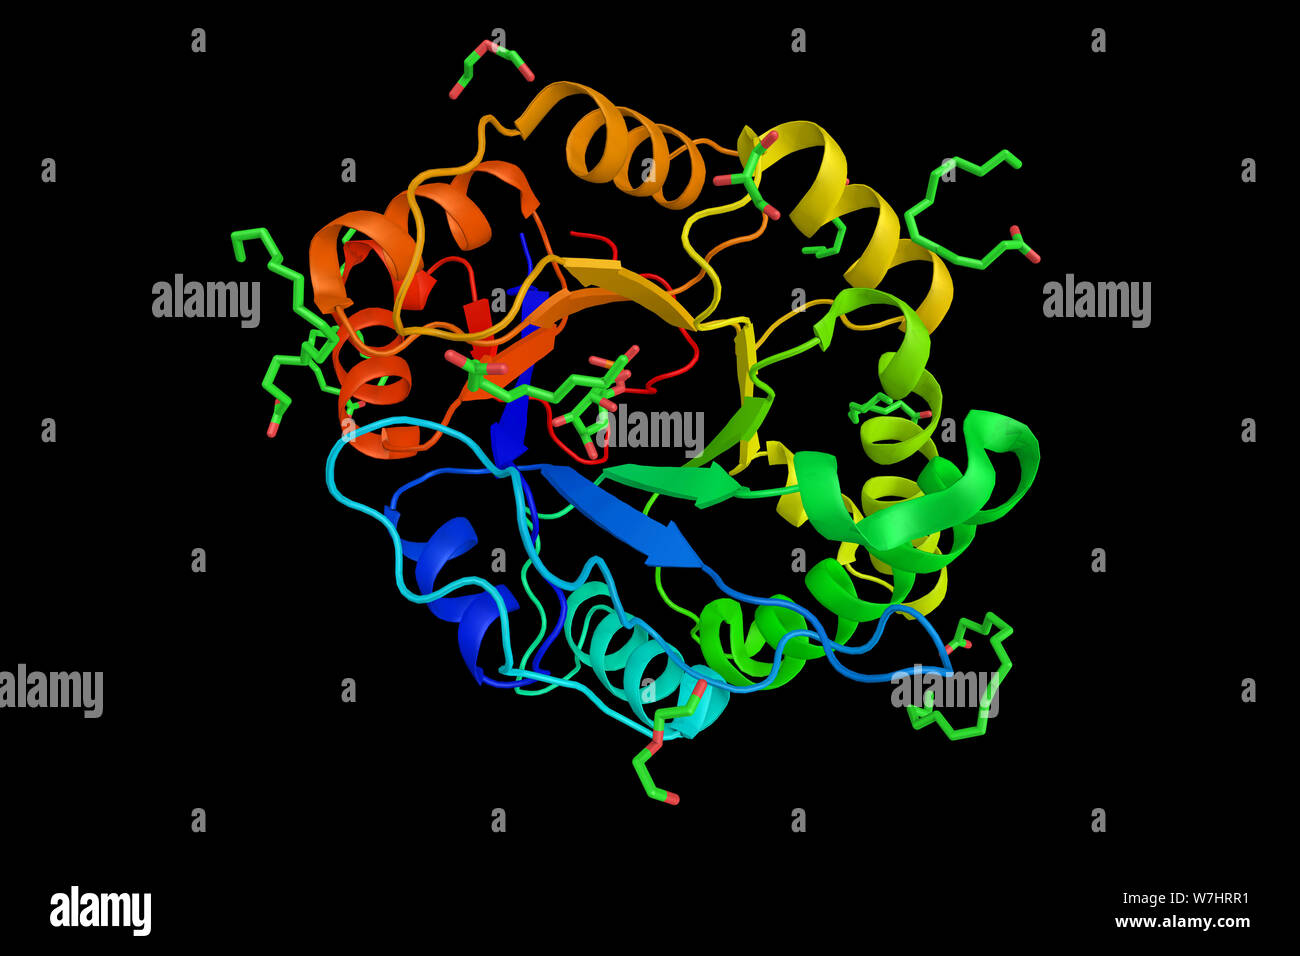 Phospholipase D, implicated in the pathophysiology of multiple diseases, an enzyme of the phospholipase superfamily. Phospholipases occur widely, and Stock Photo